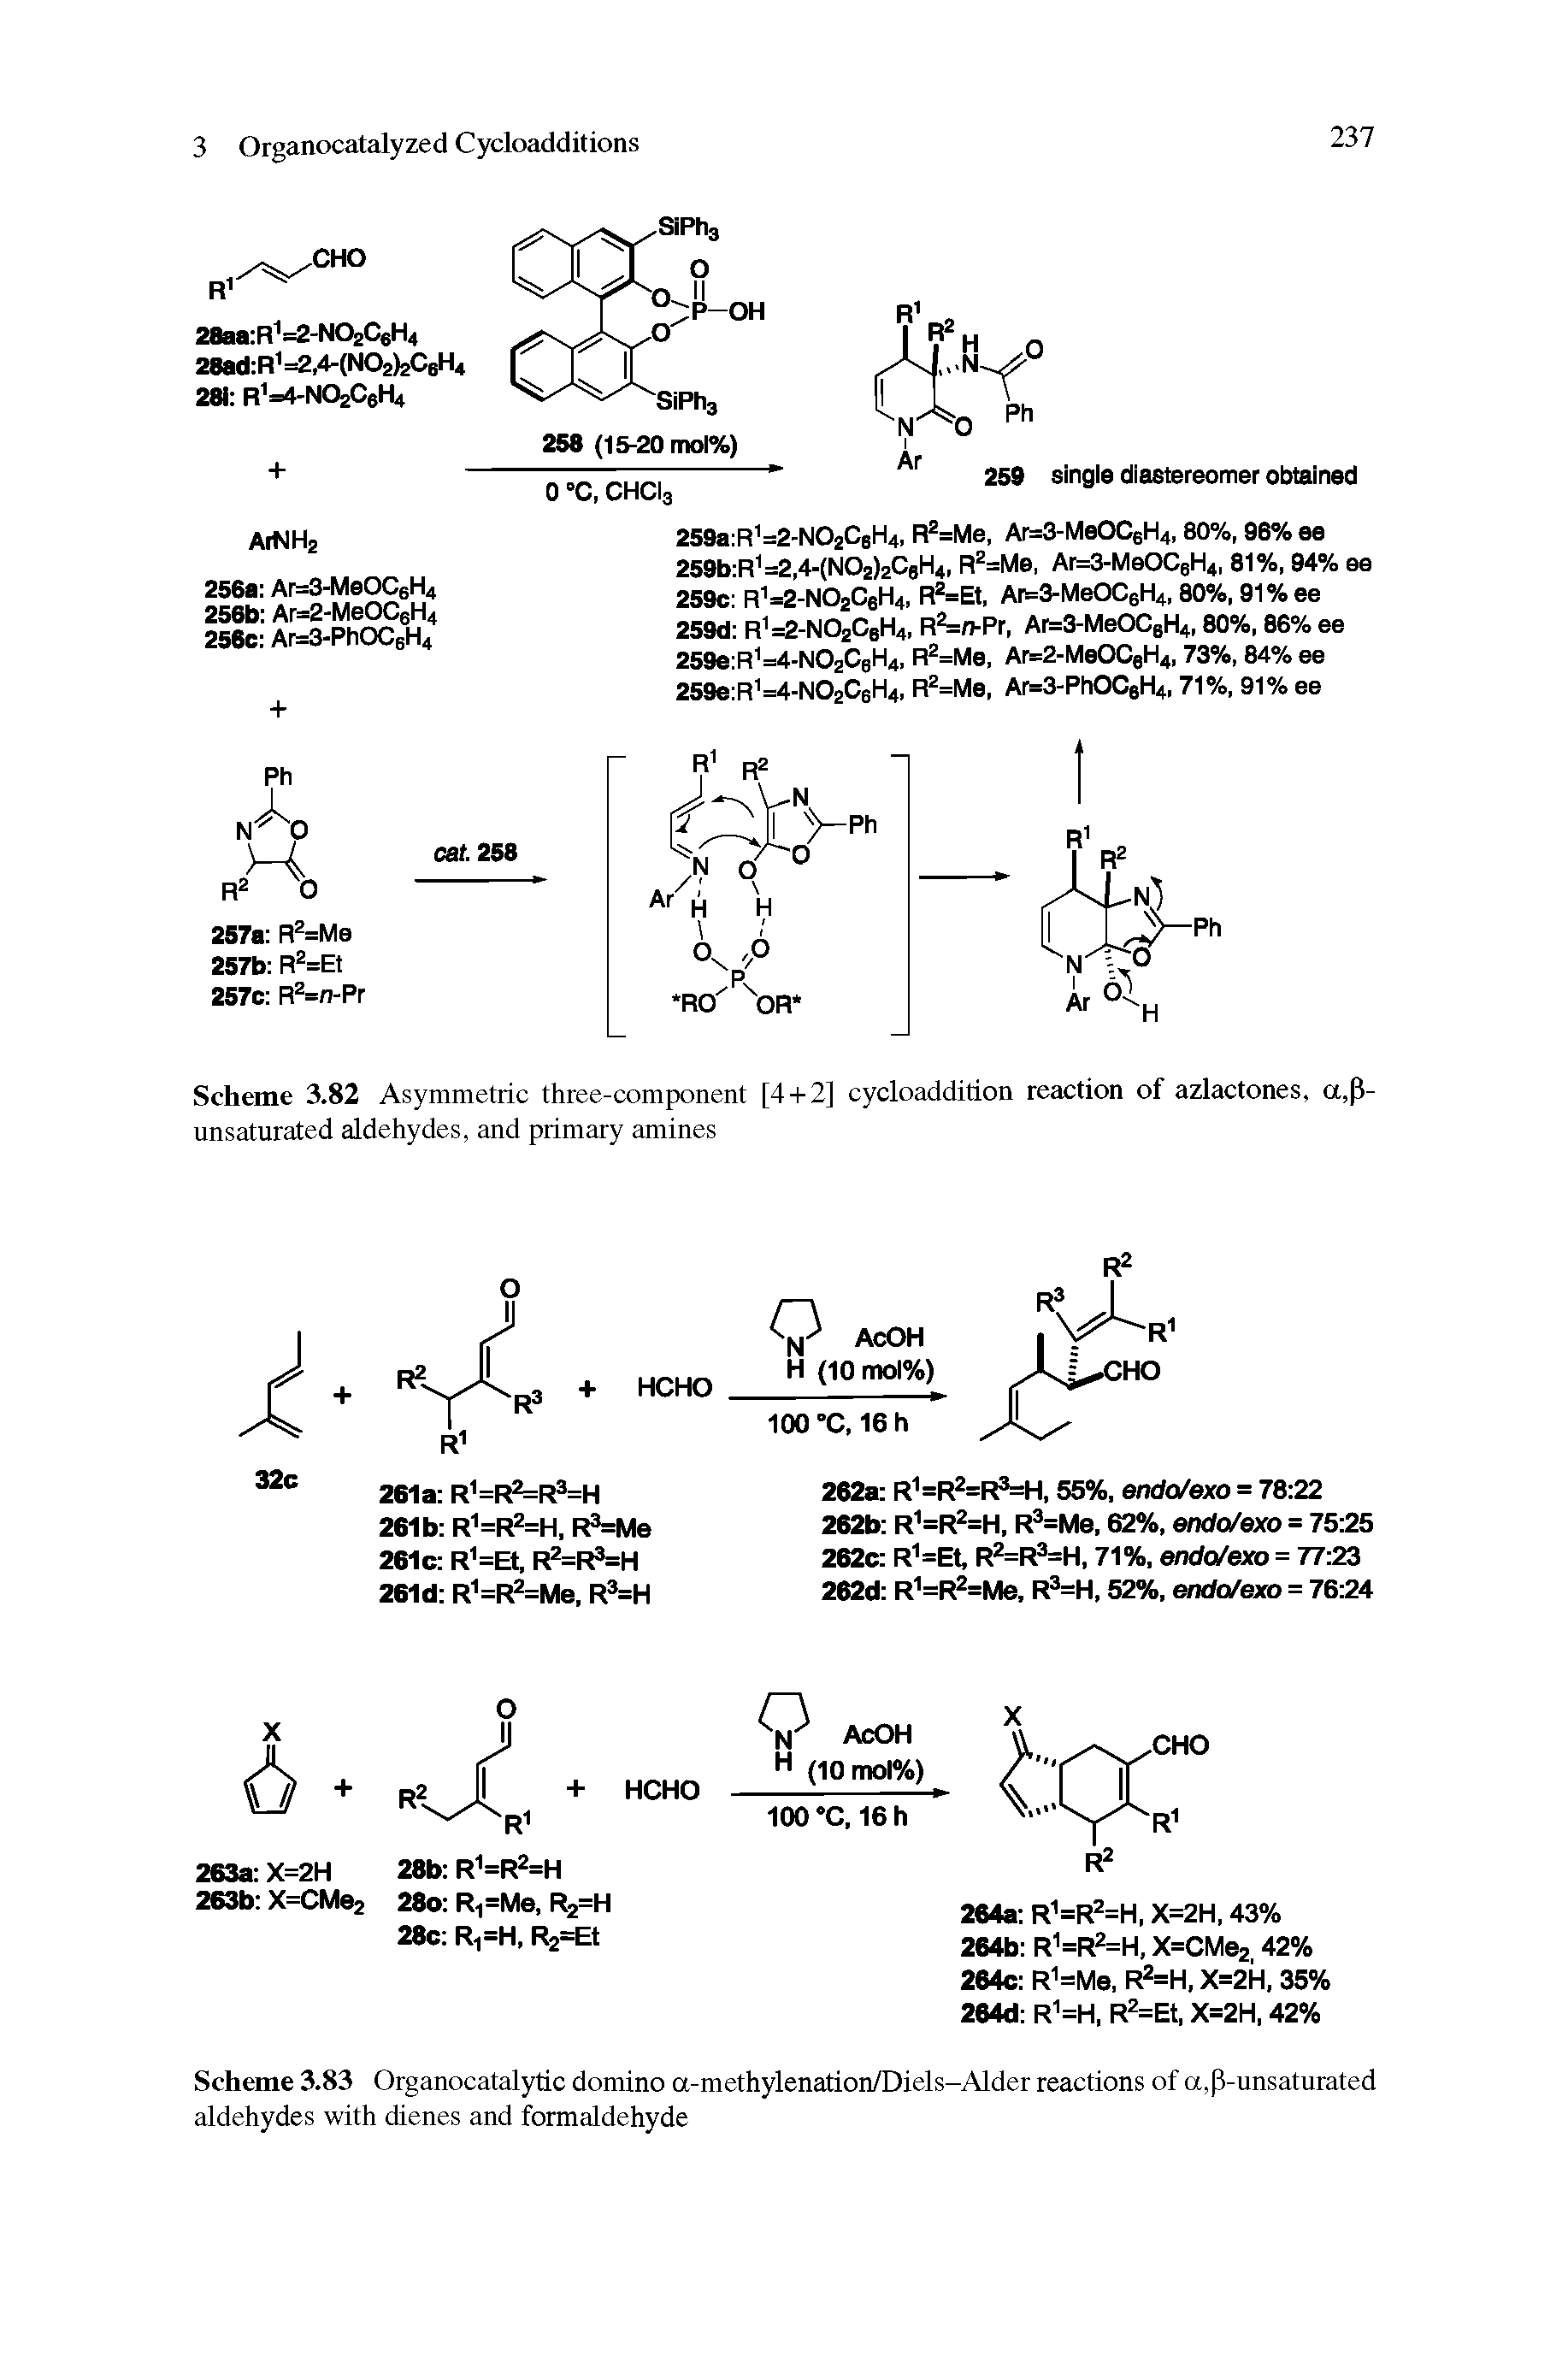 Scheme 3.83 Organocatalytic domino a-methylenation/Diels-Alder reactions of a,p-unsaturated aldehydes with dienes and formaldehyde...